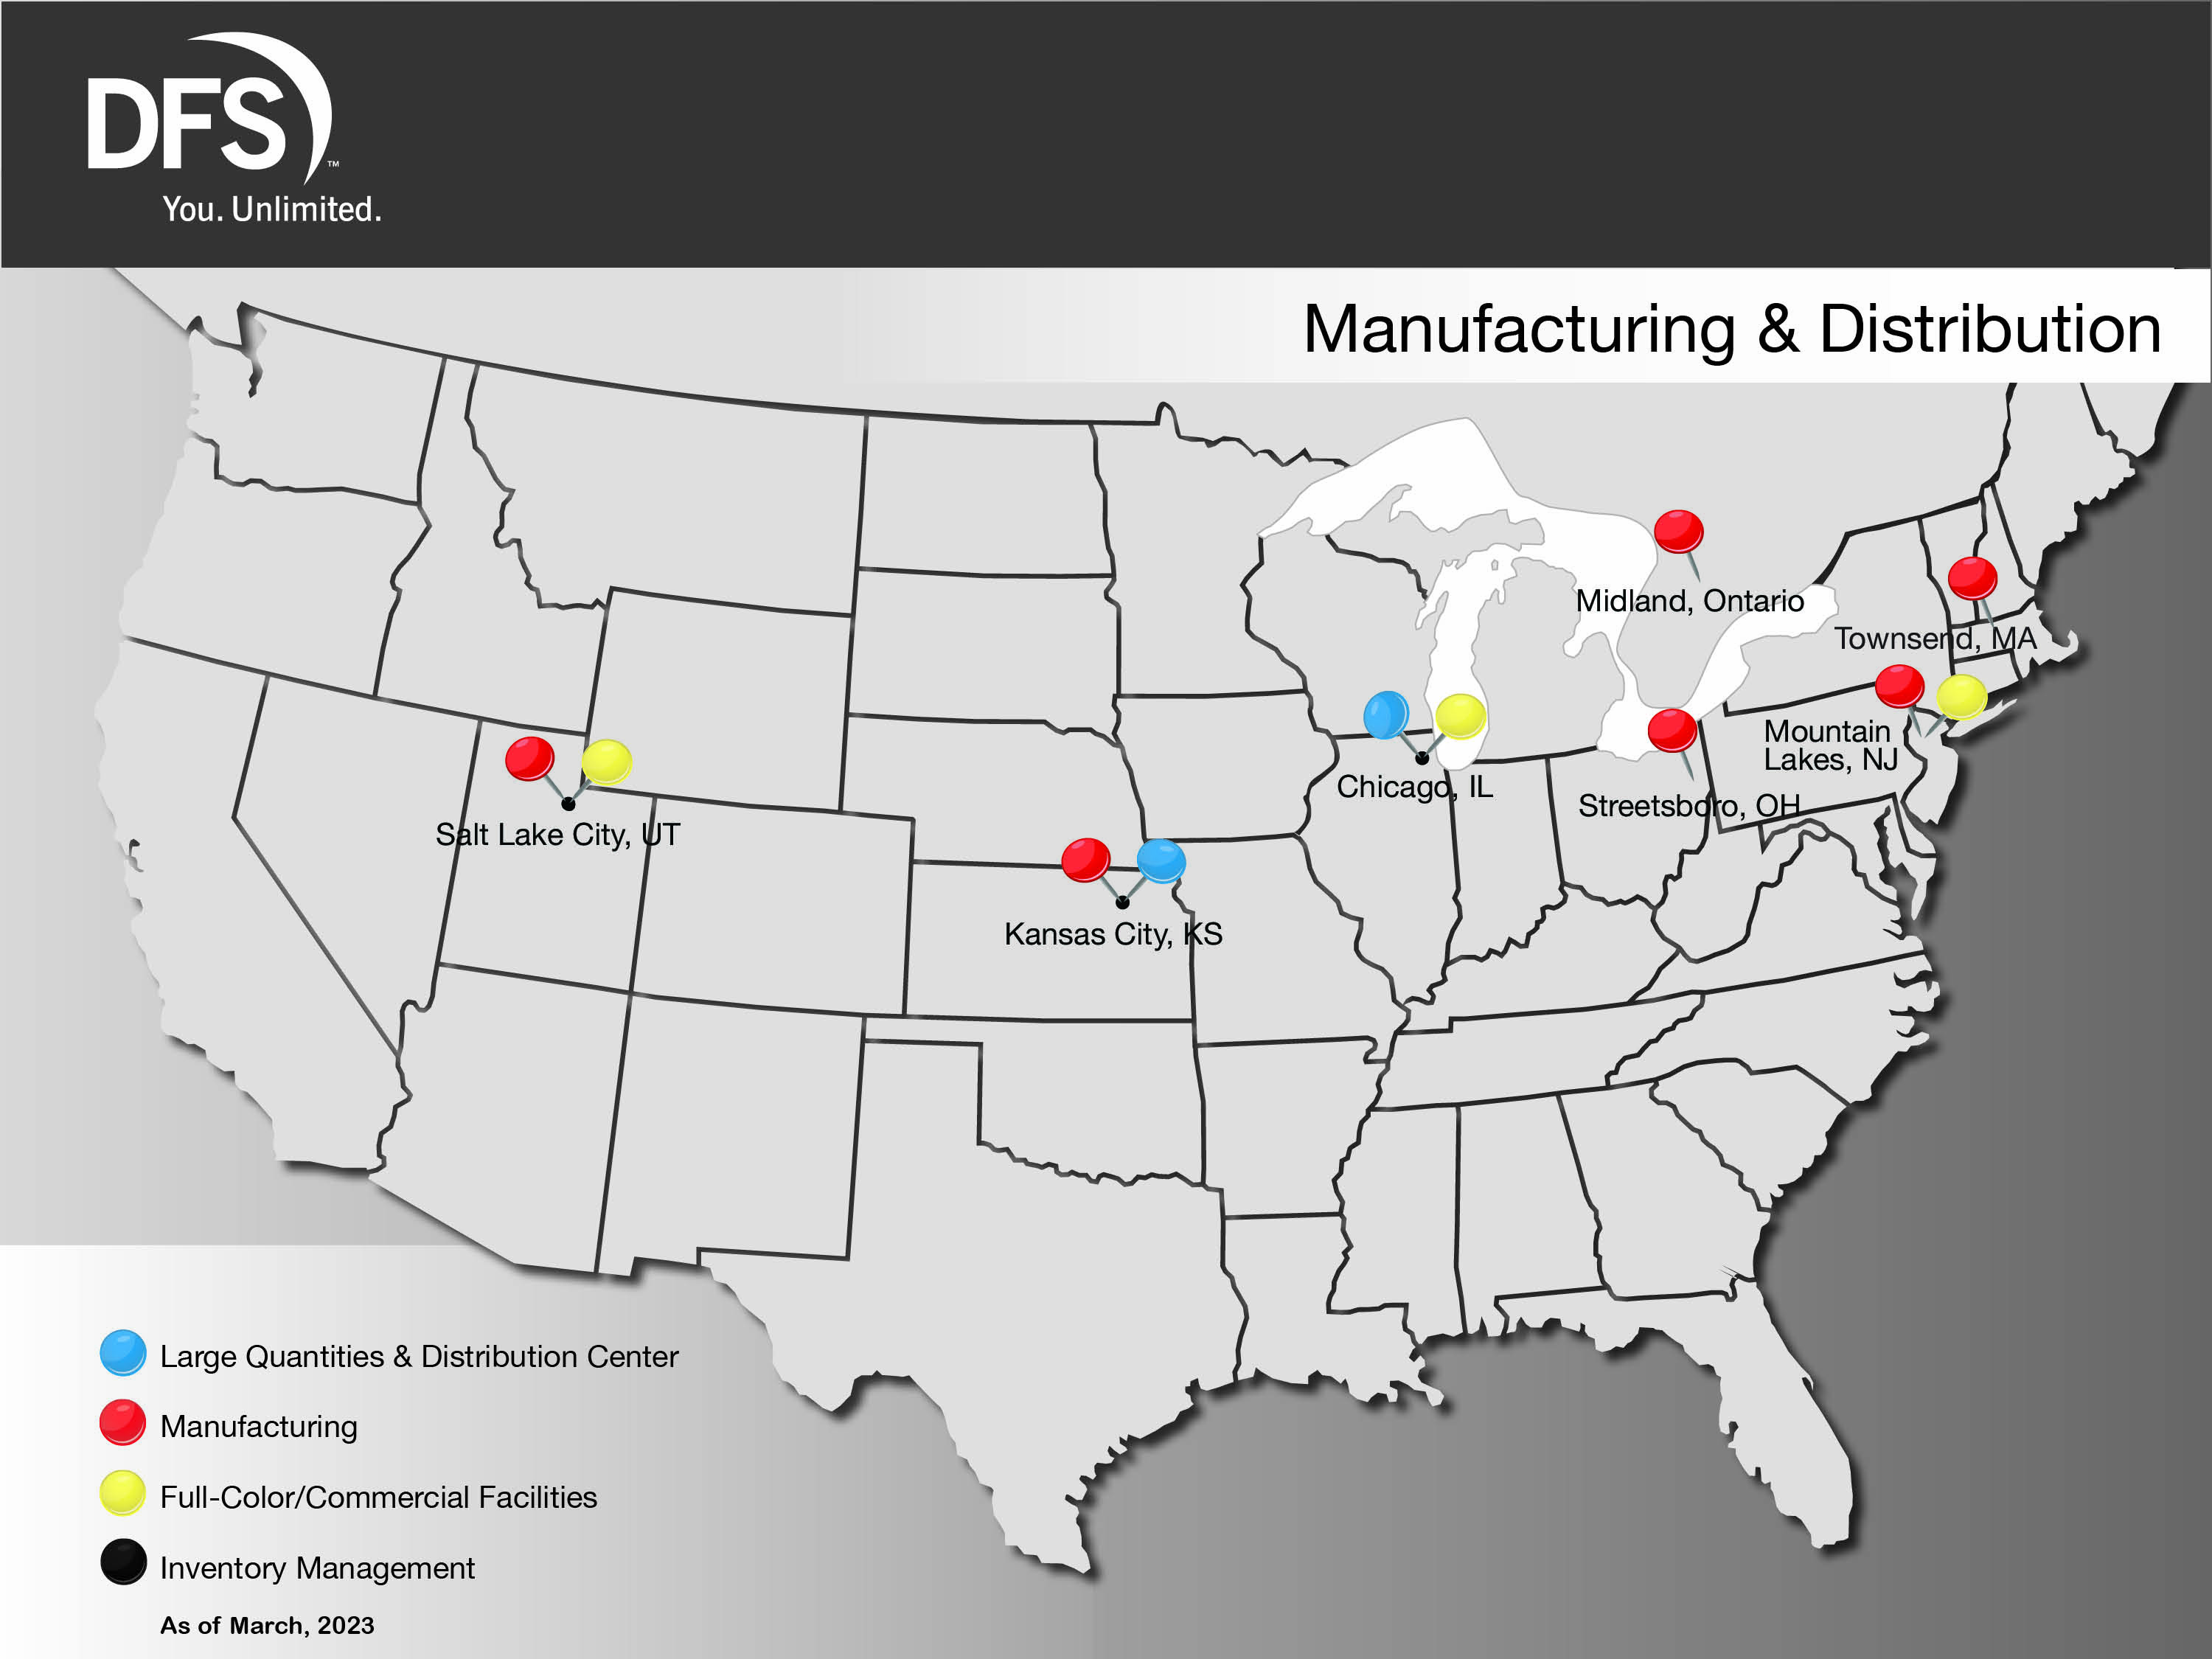 Map of DFS facilities in North America. From left to right: Oakland, CA, Salt Lake City, UT, Kansas City, KS, Arden Hills, MN, Maryville, MO, Chicago, IL, Lithia Springs, GA, Streetsboro, OH, Midland, ON, Mountain Lakes, NJ, Townsend, MA.